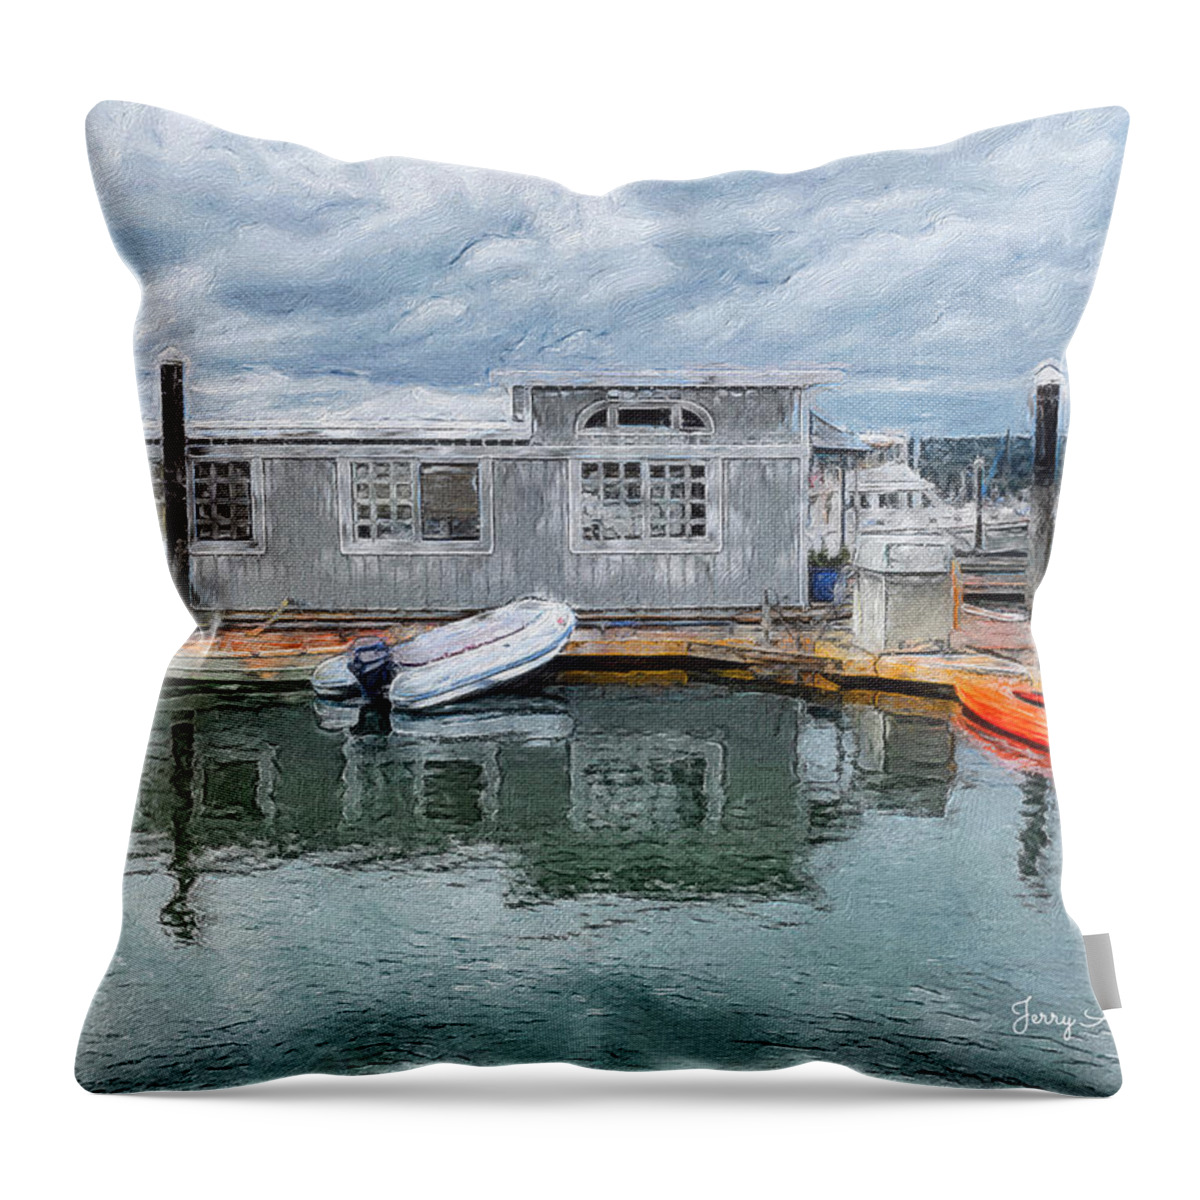 Brushstroke Throw Pillow featuring the photograph Dinghies by Jerry Abbott